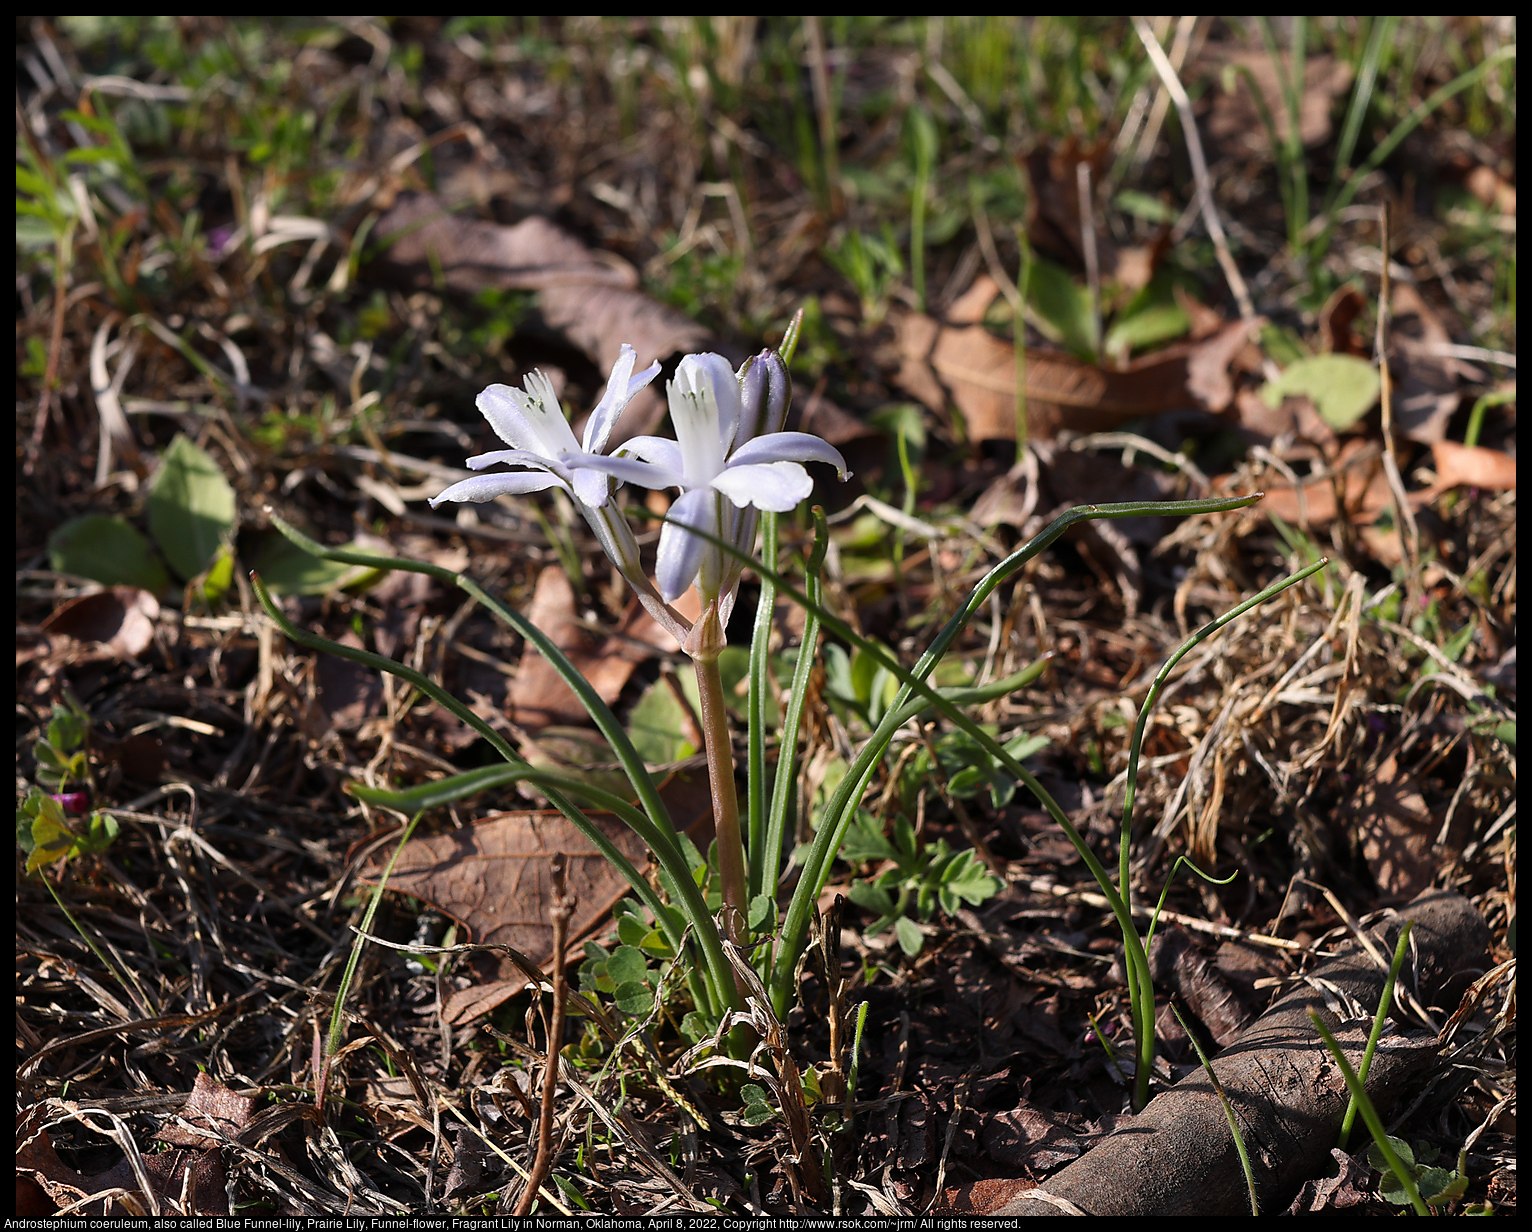 Androstephium coeruleum, also called Blue Funnel-lily, Prairie Lily, Funnel-flower, Fragrant Lily in Norman, Oklahoma, April 8, 2022